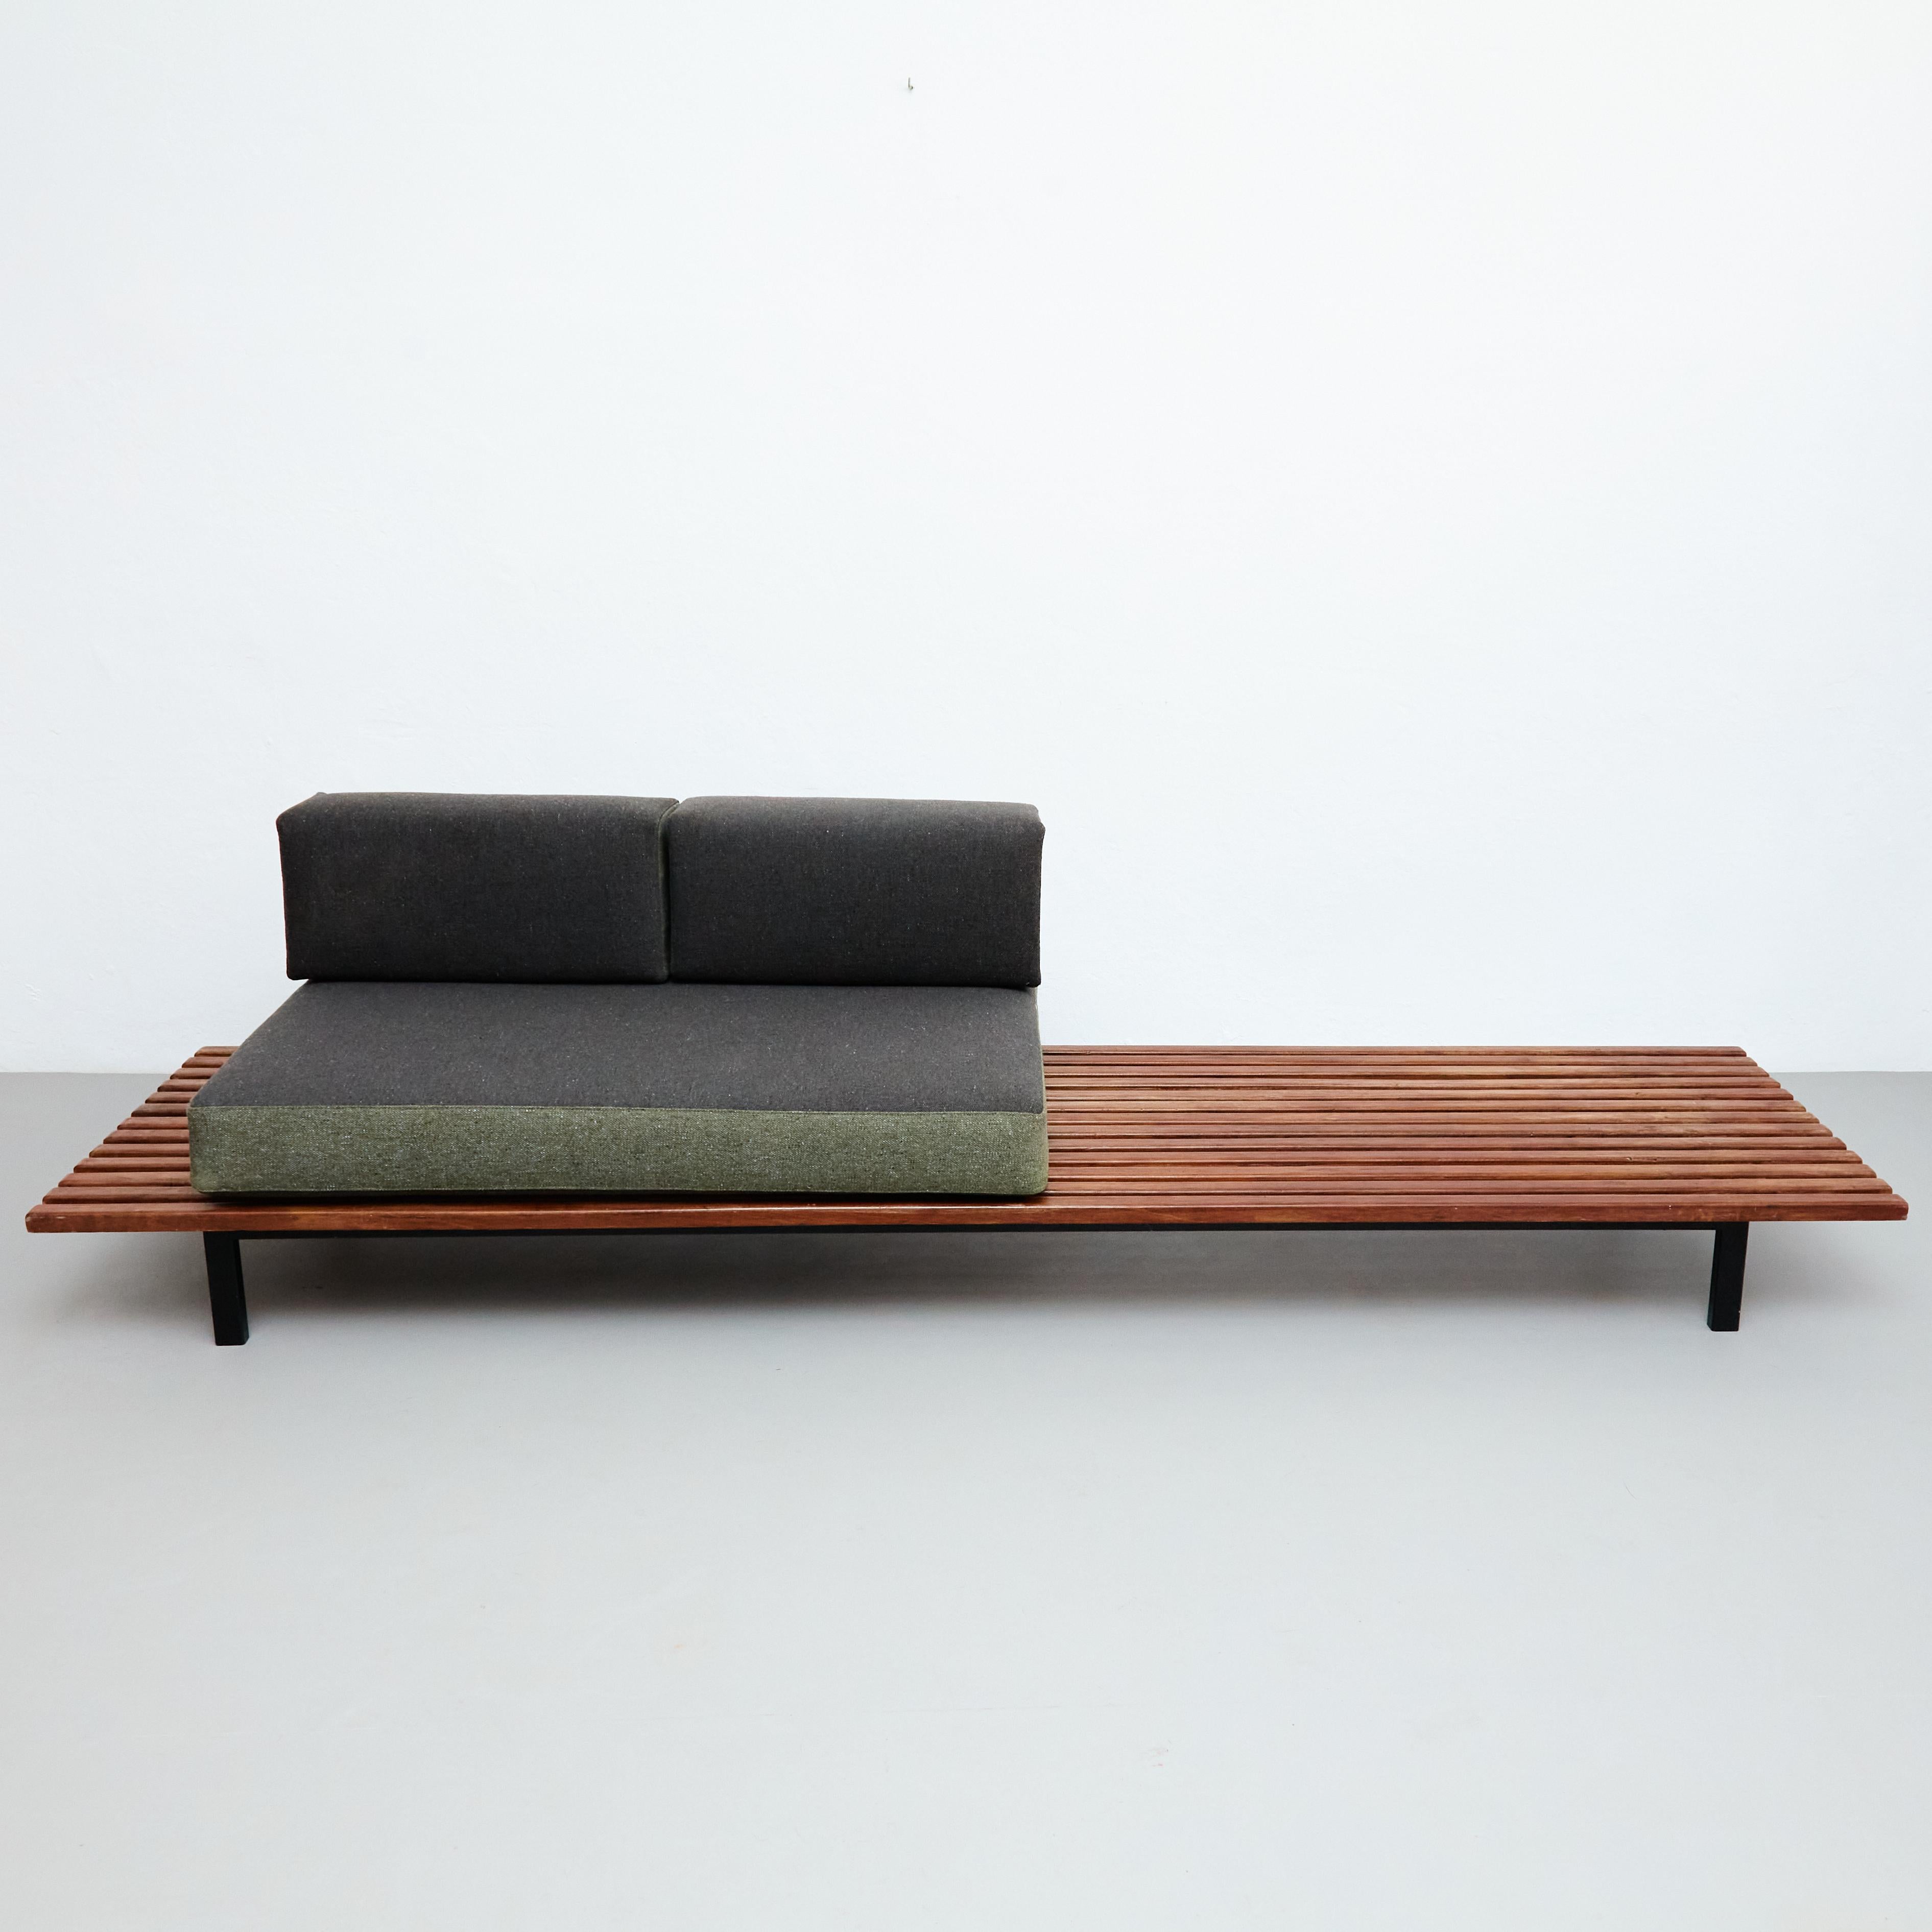 Bench designed by Charlotte Perriand.
Edited by Steph Simon.

Provenance: Cansado, Mauritania (Africa).

In original condition with minor wear consistent of age and use, preserving a beautiful patina.

Materials: 
Wood, metal, fabric

Dimensions: 
D